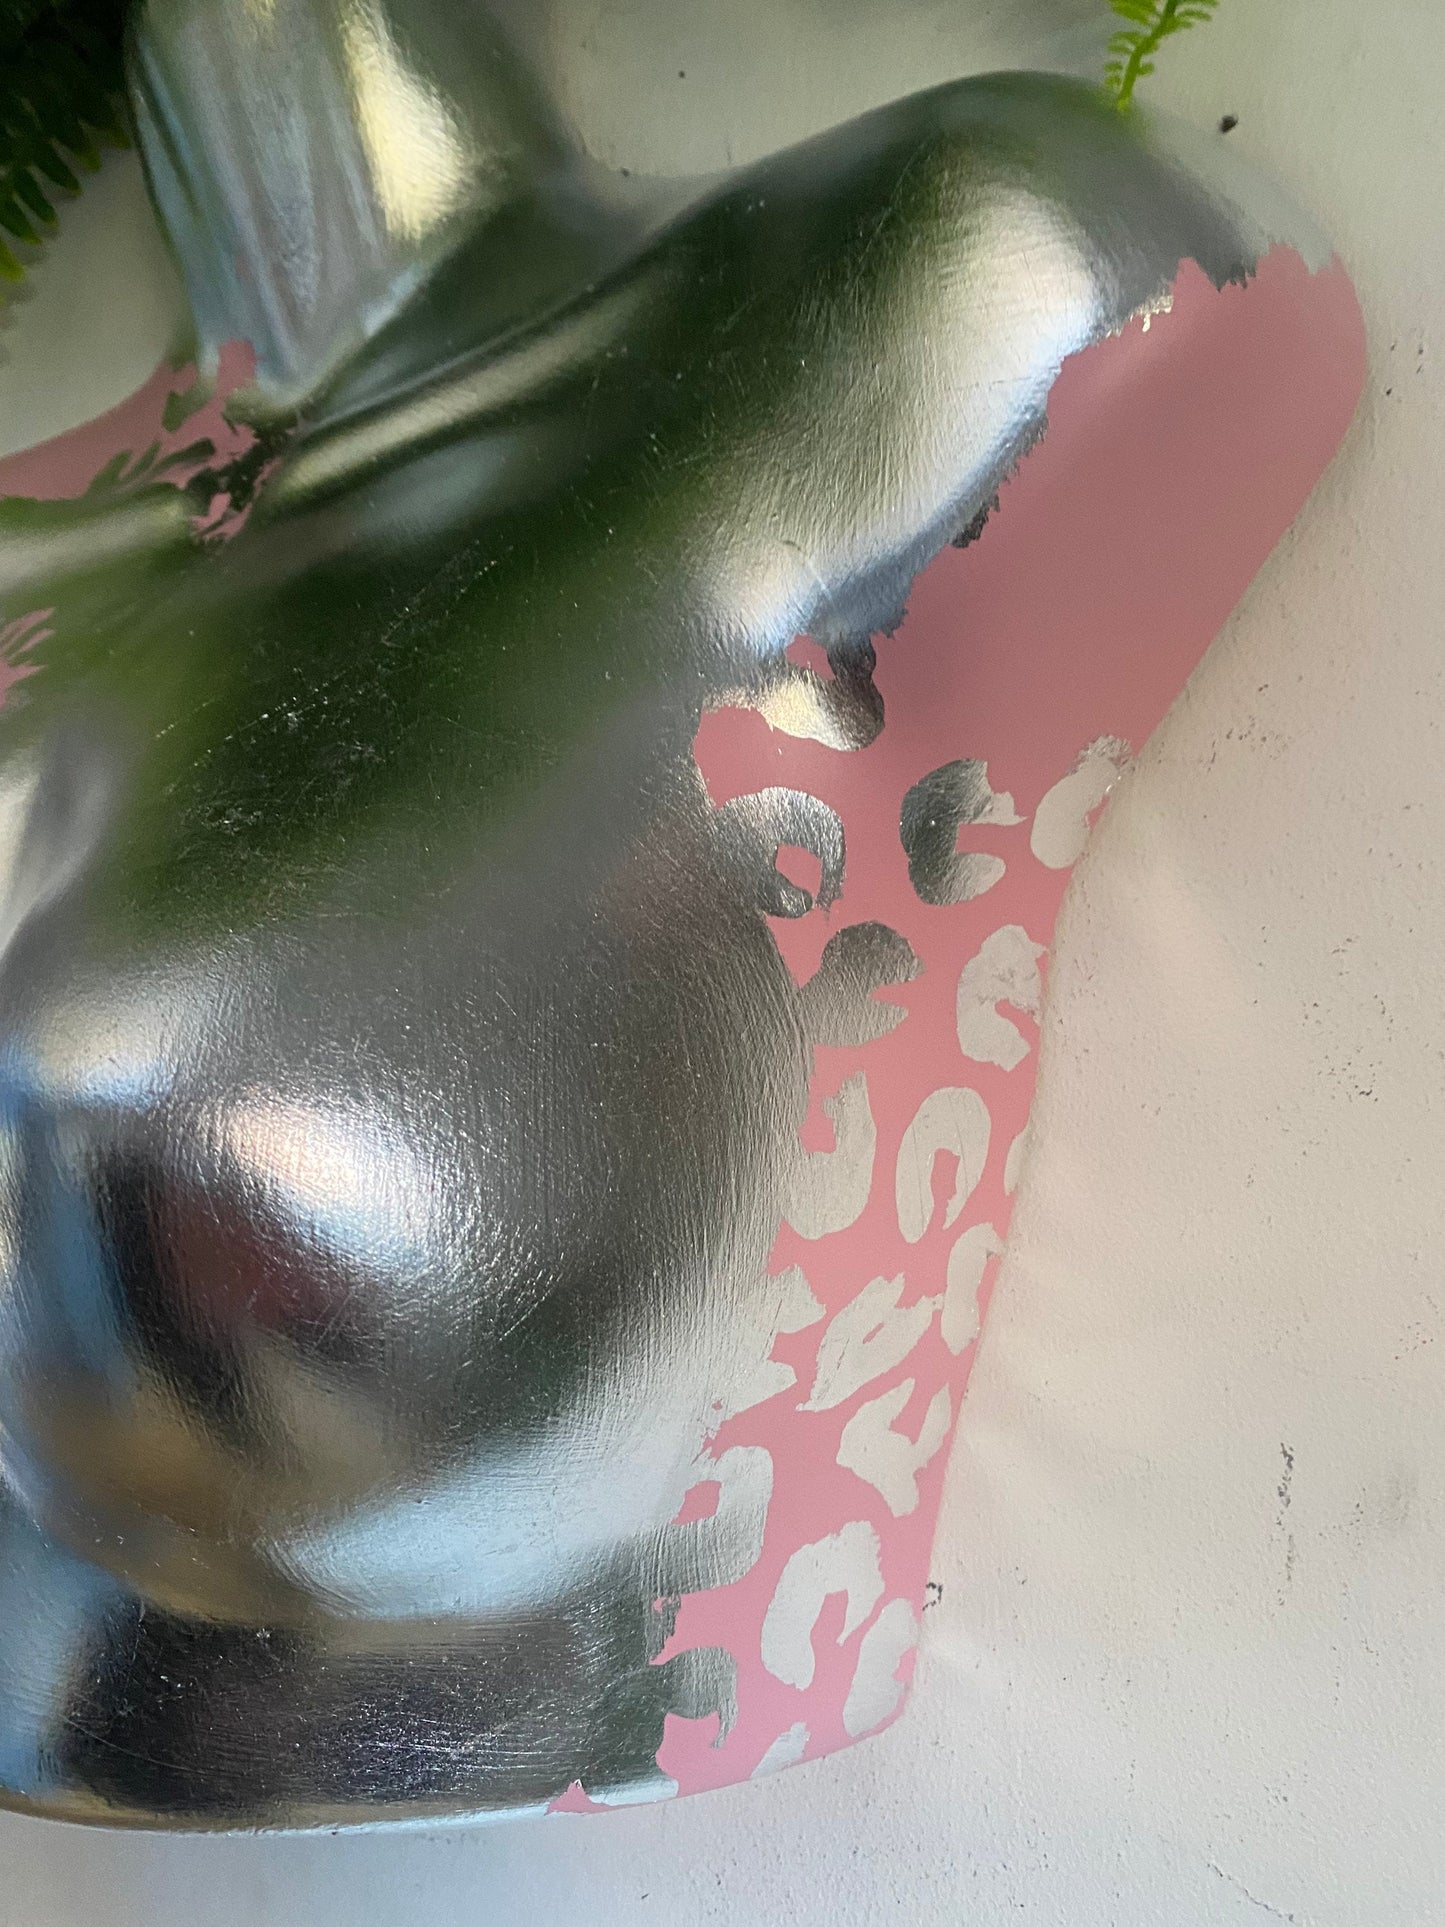 Female Wall Torso Boobie Artificial Plant Holder Pink and Silver warrior with silver leopard